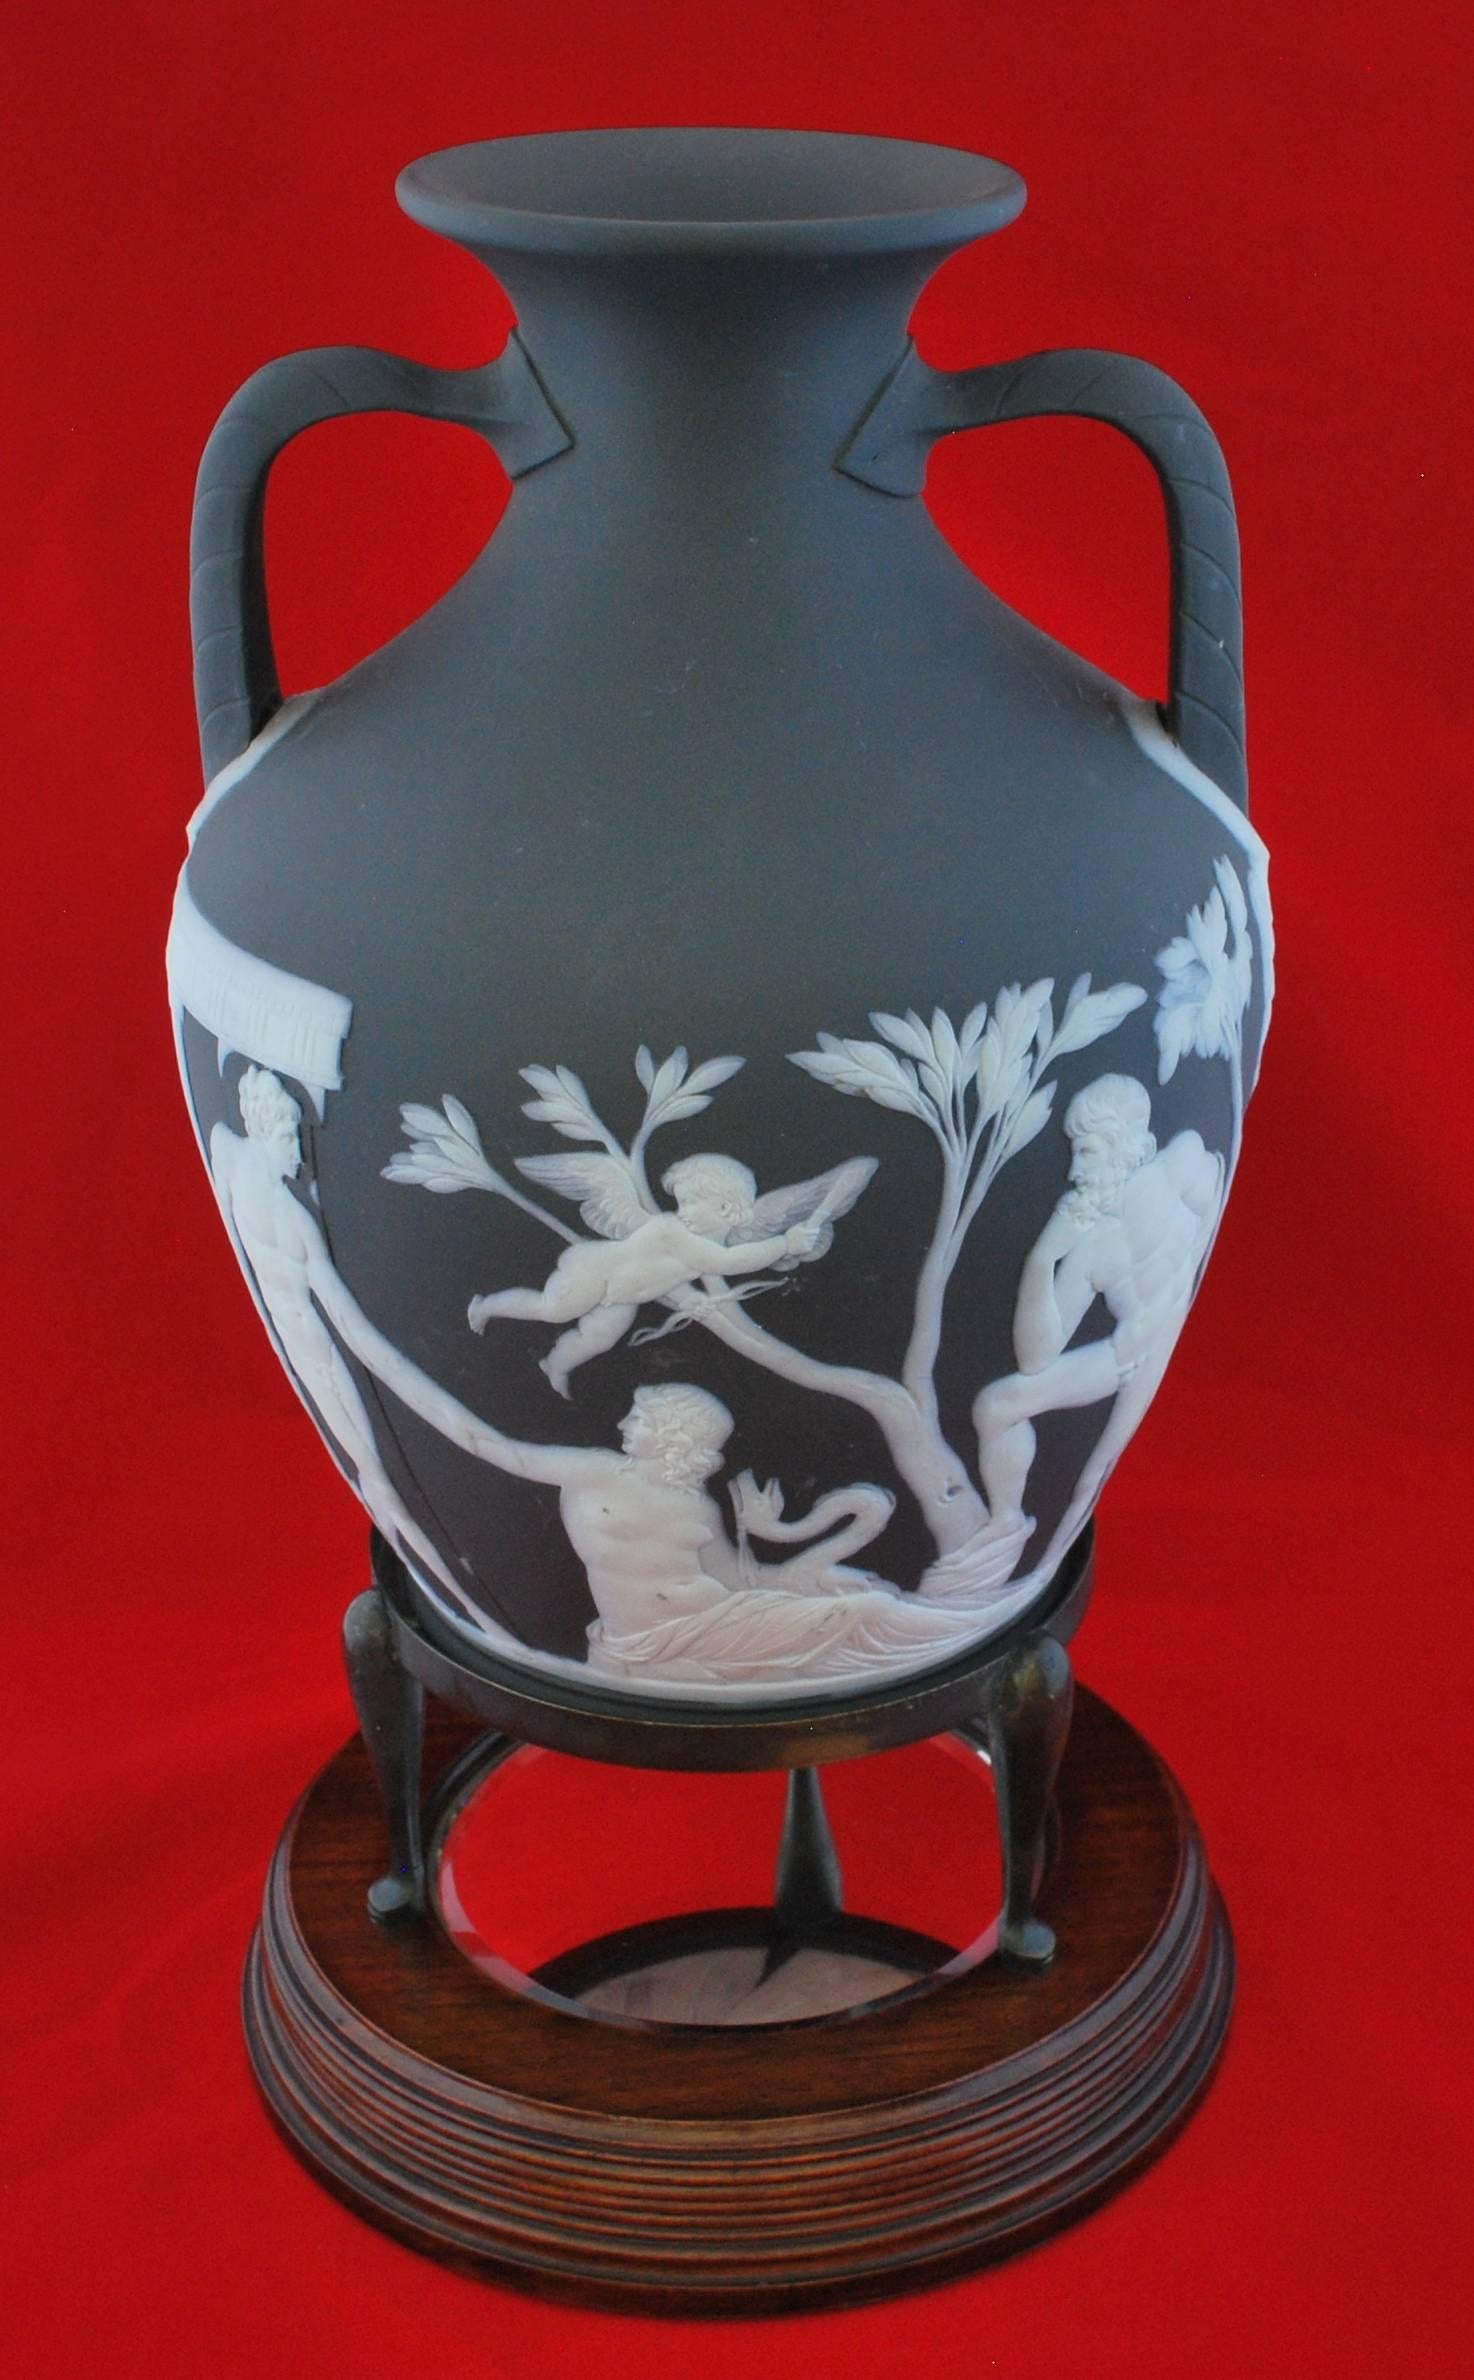 A superb special edition of the Portland Vase, decorated by Bert Bentley. The original mirrored stand shows the decoration to the base.

Although decorated by Bert Bentley, this is the edition known as the Harry Barnard Edition. Barnard was tasked